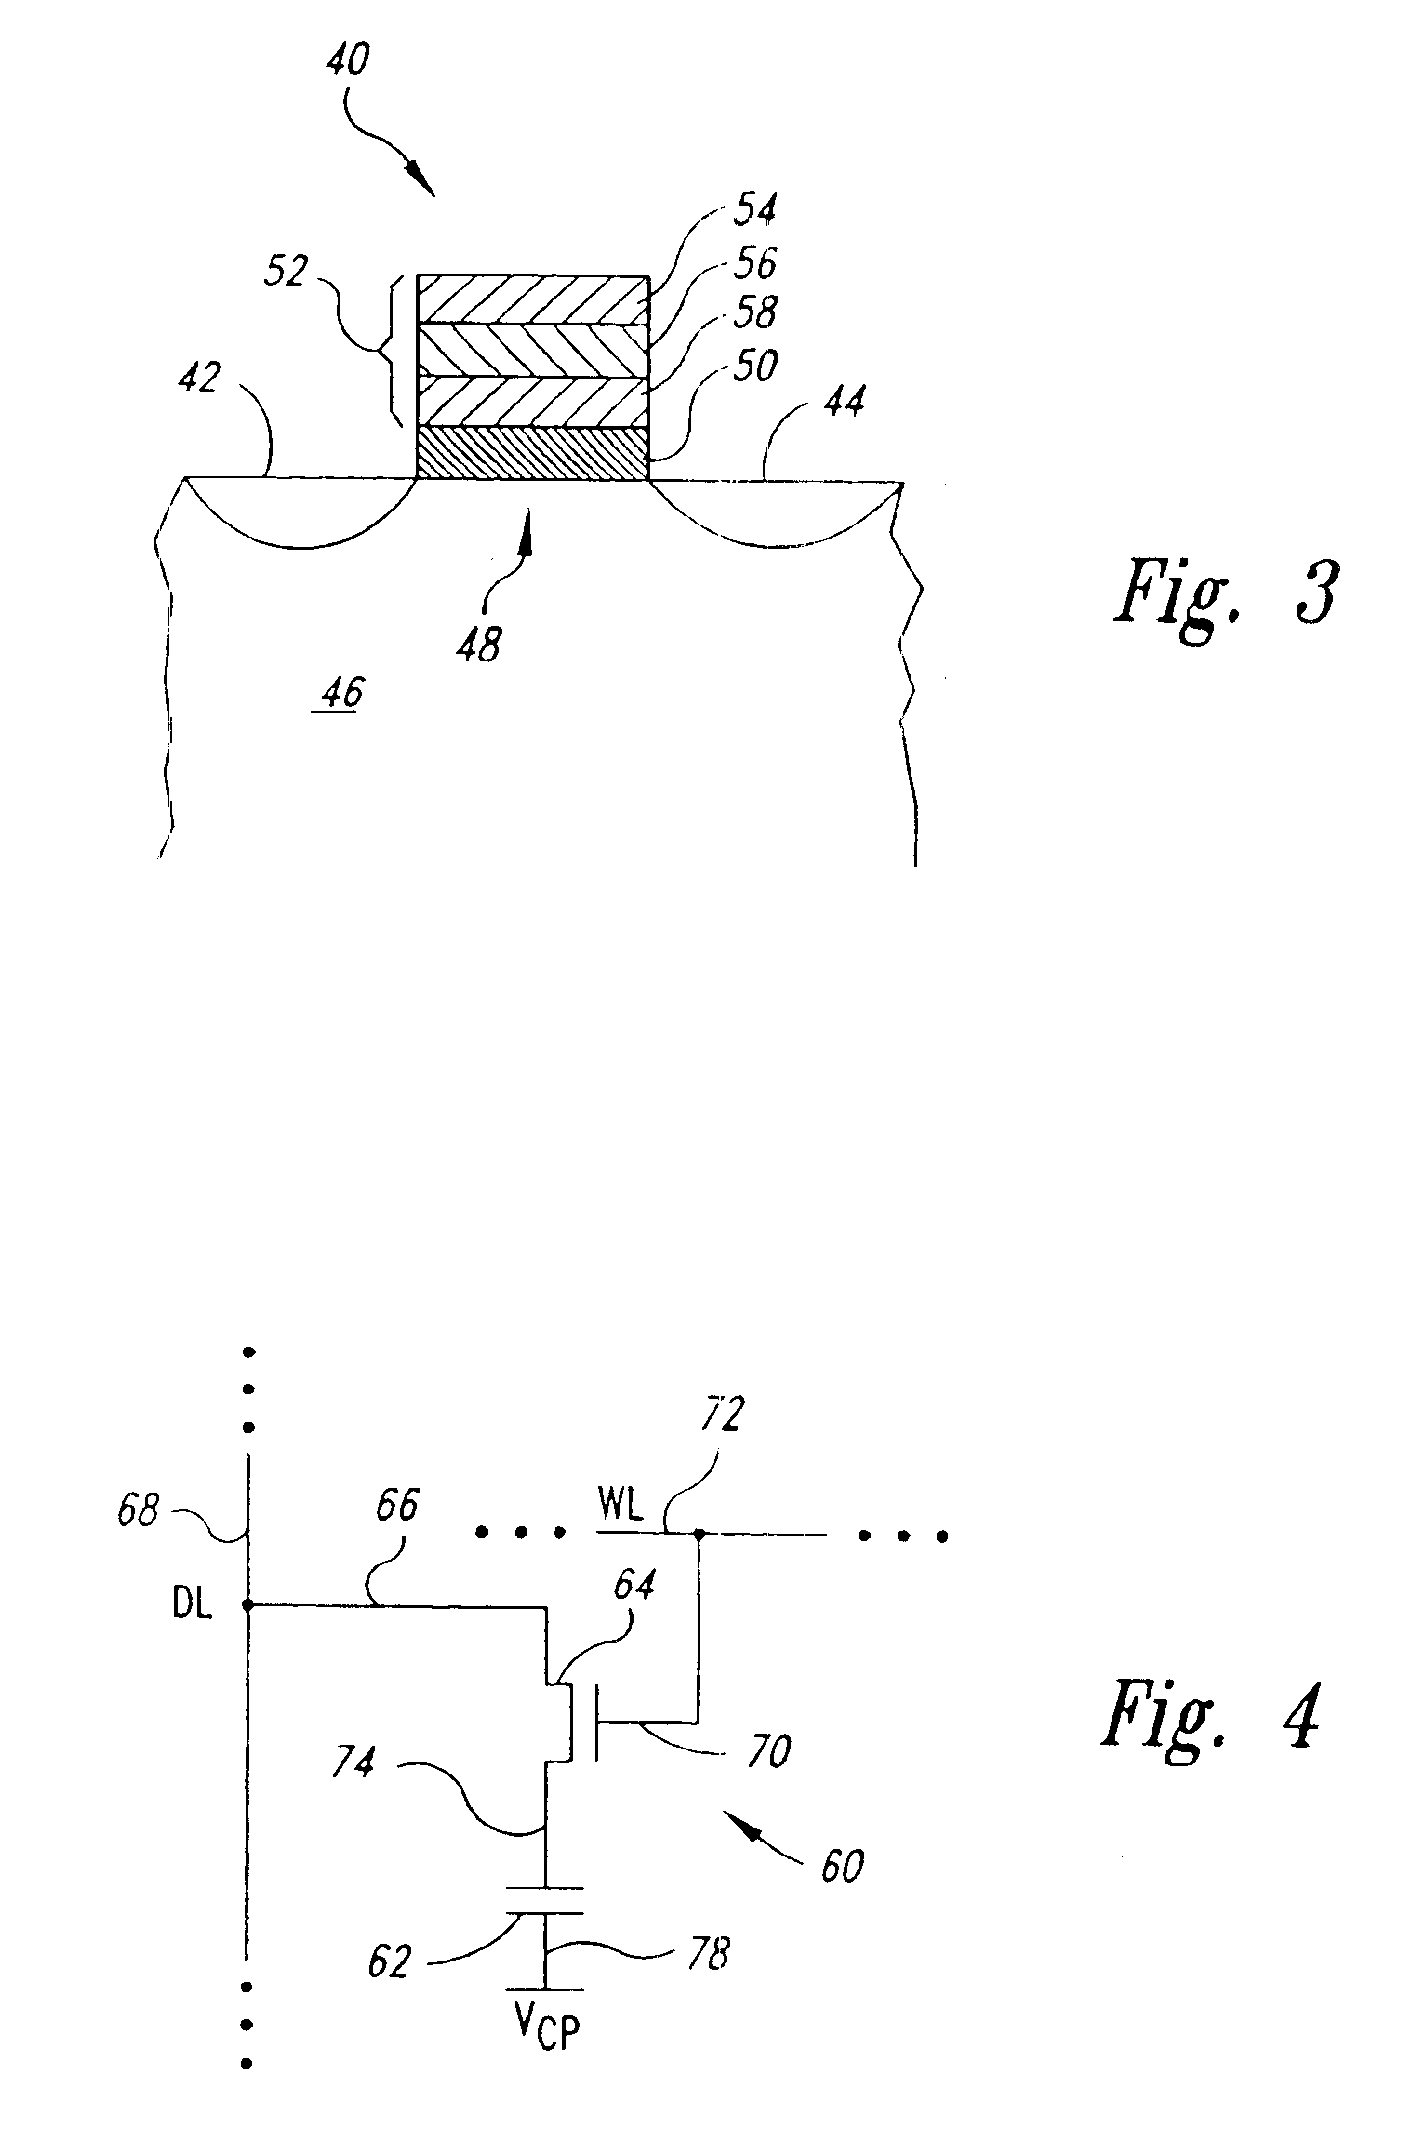 Methods for enhancing capacitors having roughened features to increase charge-storage capacity